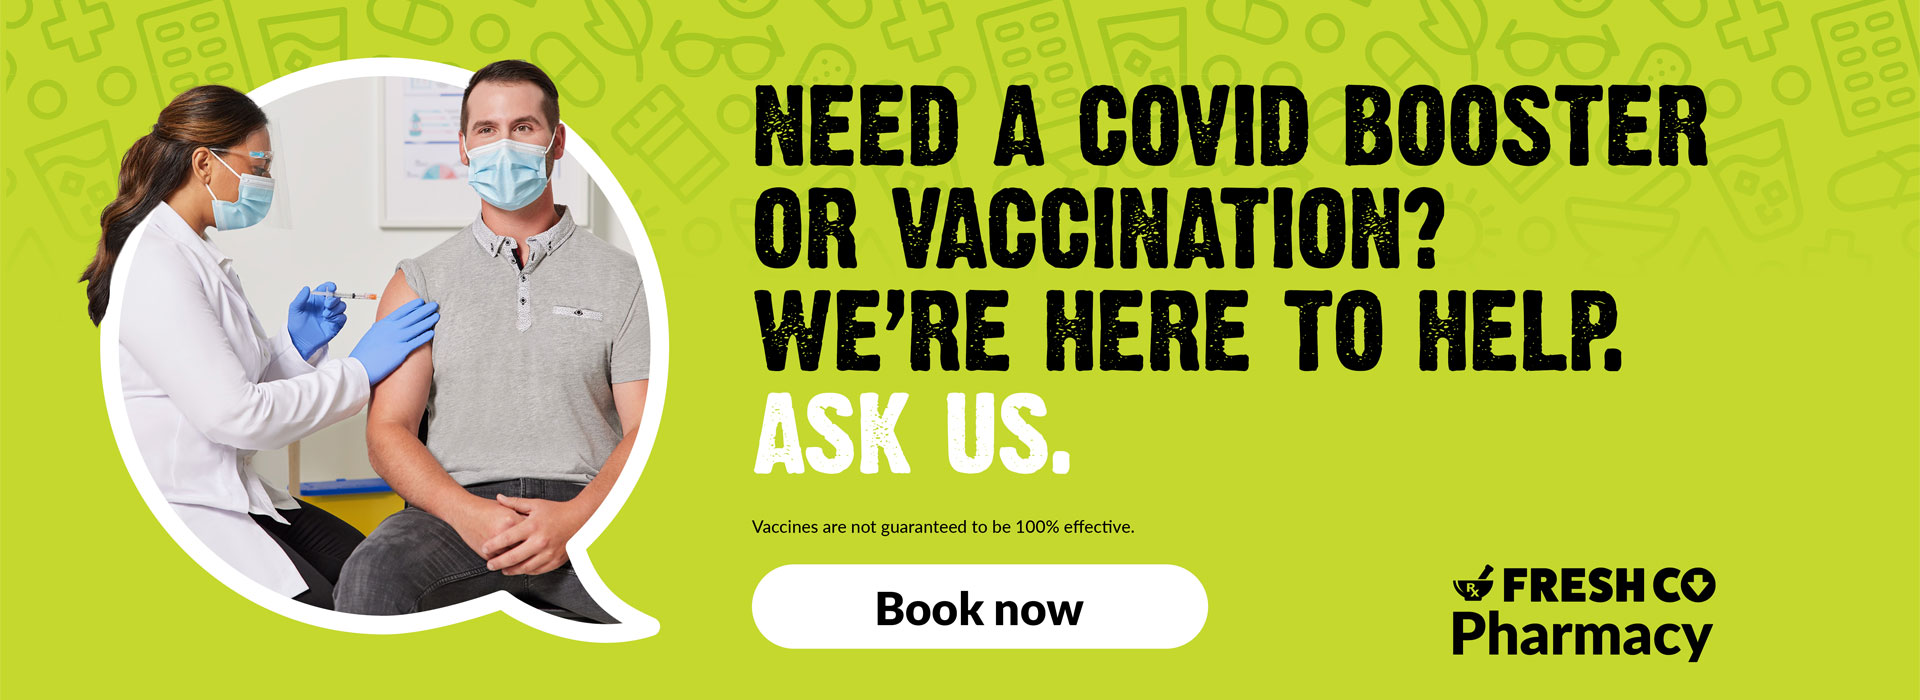 Text Reading 'Need a Covid booster or vaccination? We're here to help. Ask us. 'Book now' from the button given below. Please note vaccines are not guaranteed to be 100% effective.'